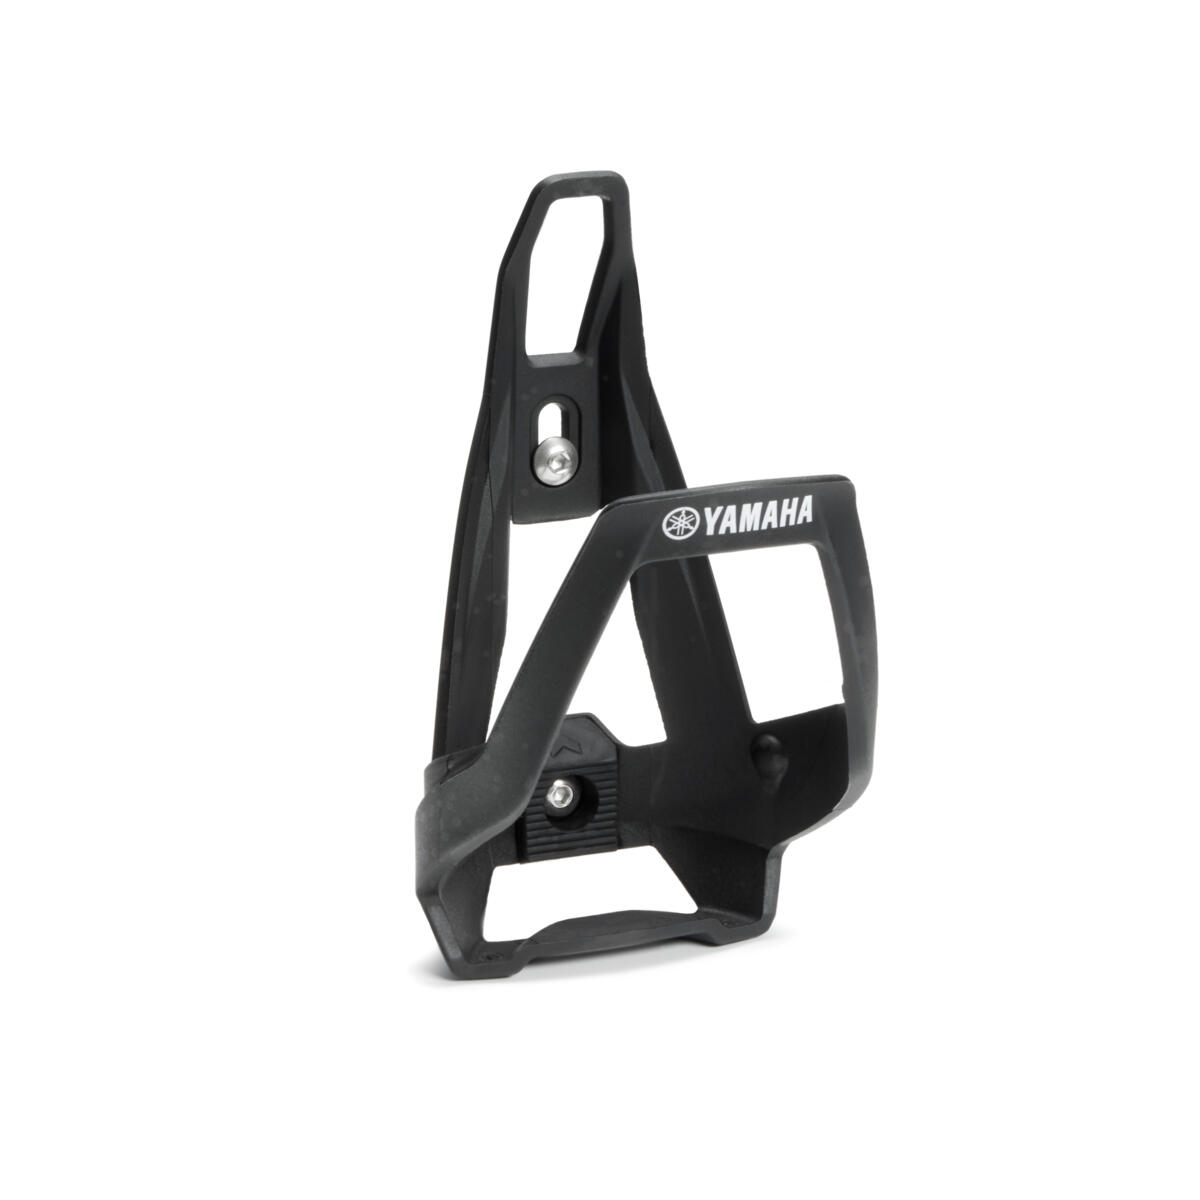 The premium bottle cage combines low weight with good bottle support, perfect for your rides. It's compatible with all bottles in the market, including the Yamaha 750ml